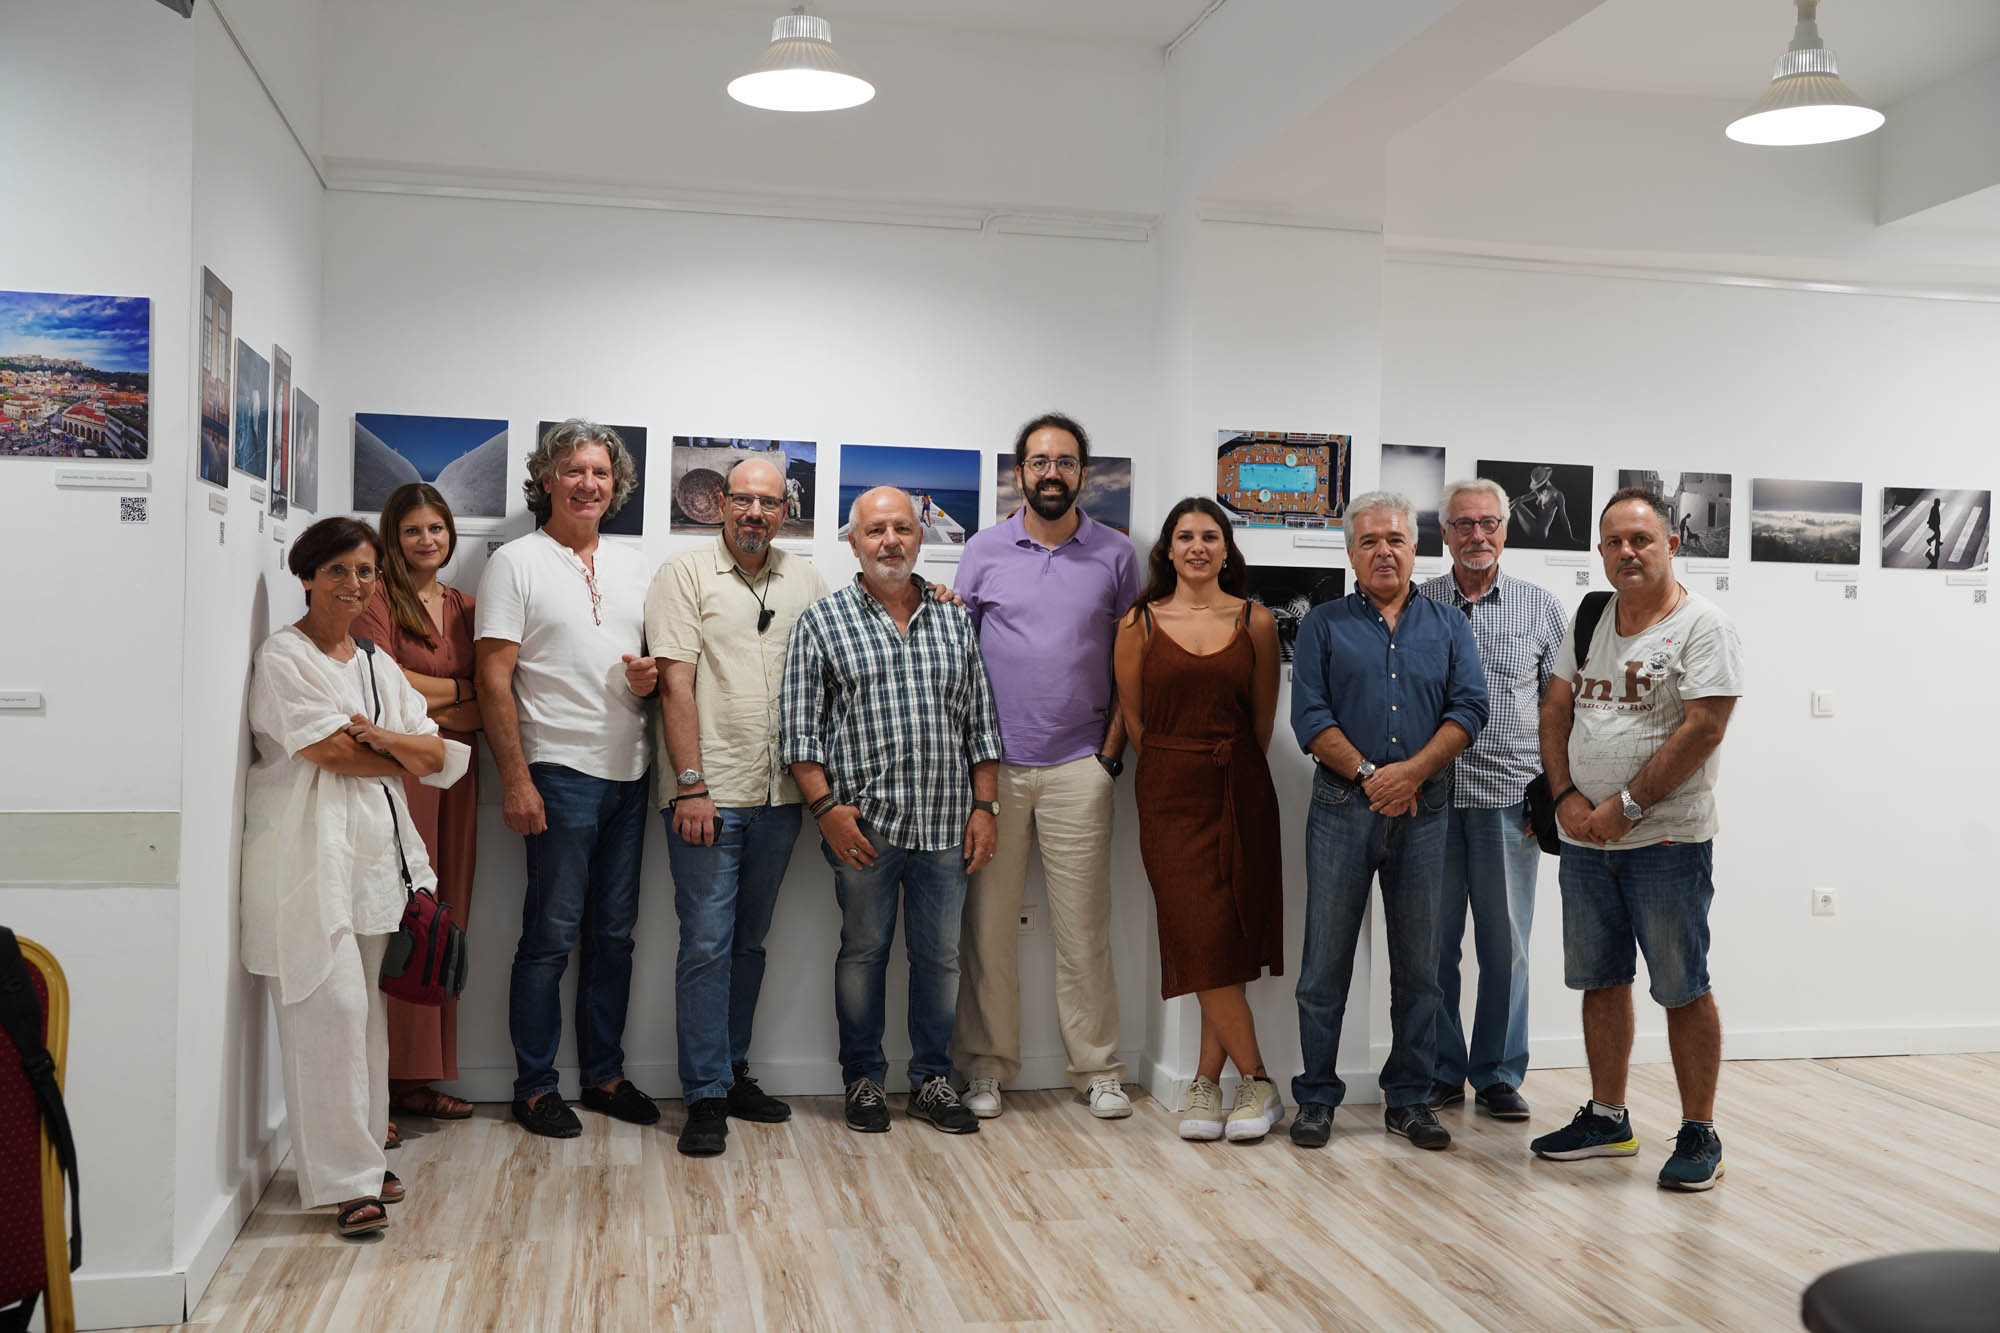 The Art of Social Media exhibition in Athens has ended